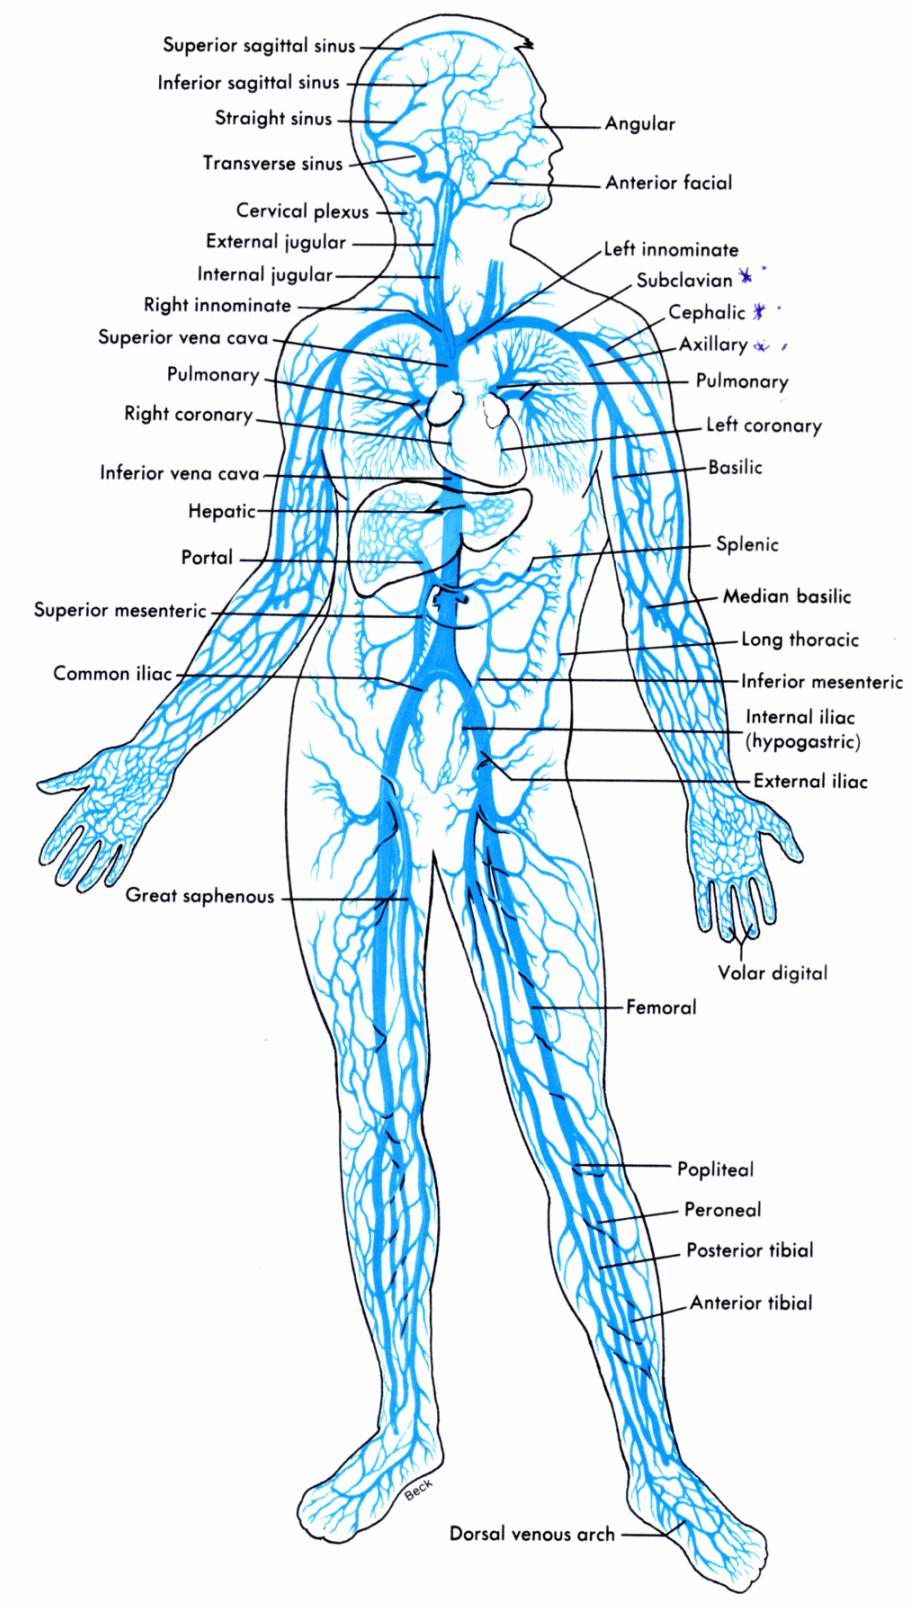 Vessels of the circulatory system VEINS Functions of veins: Carry deoxygenated blood away from capillaries to